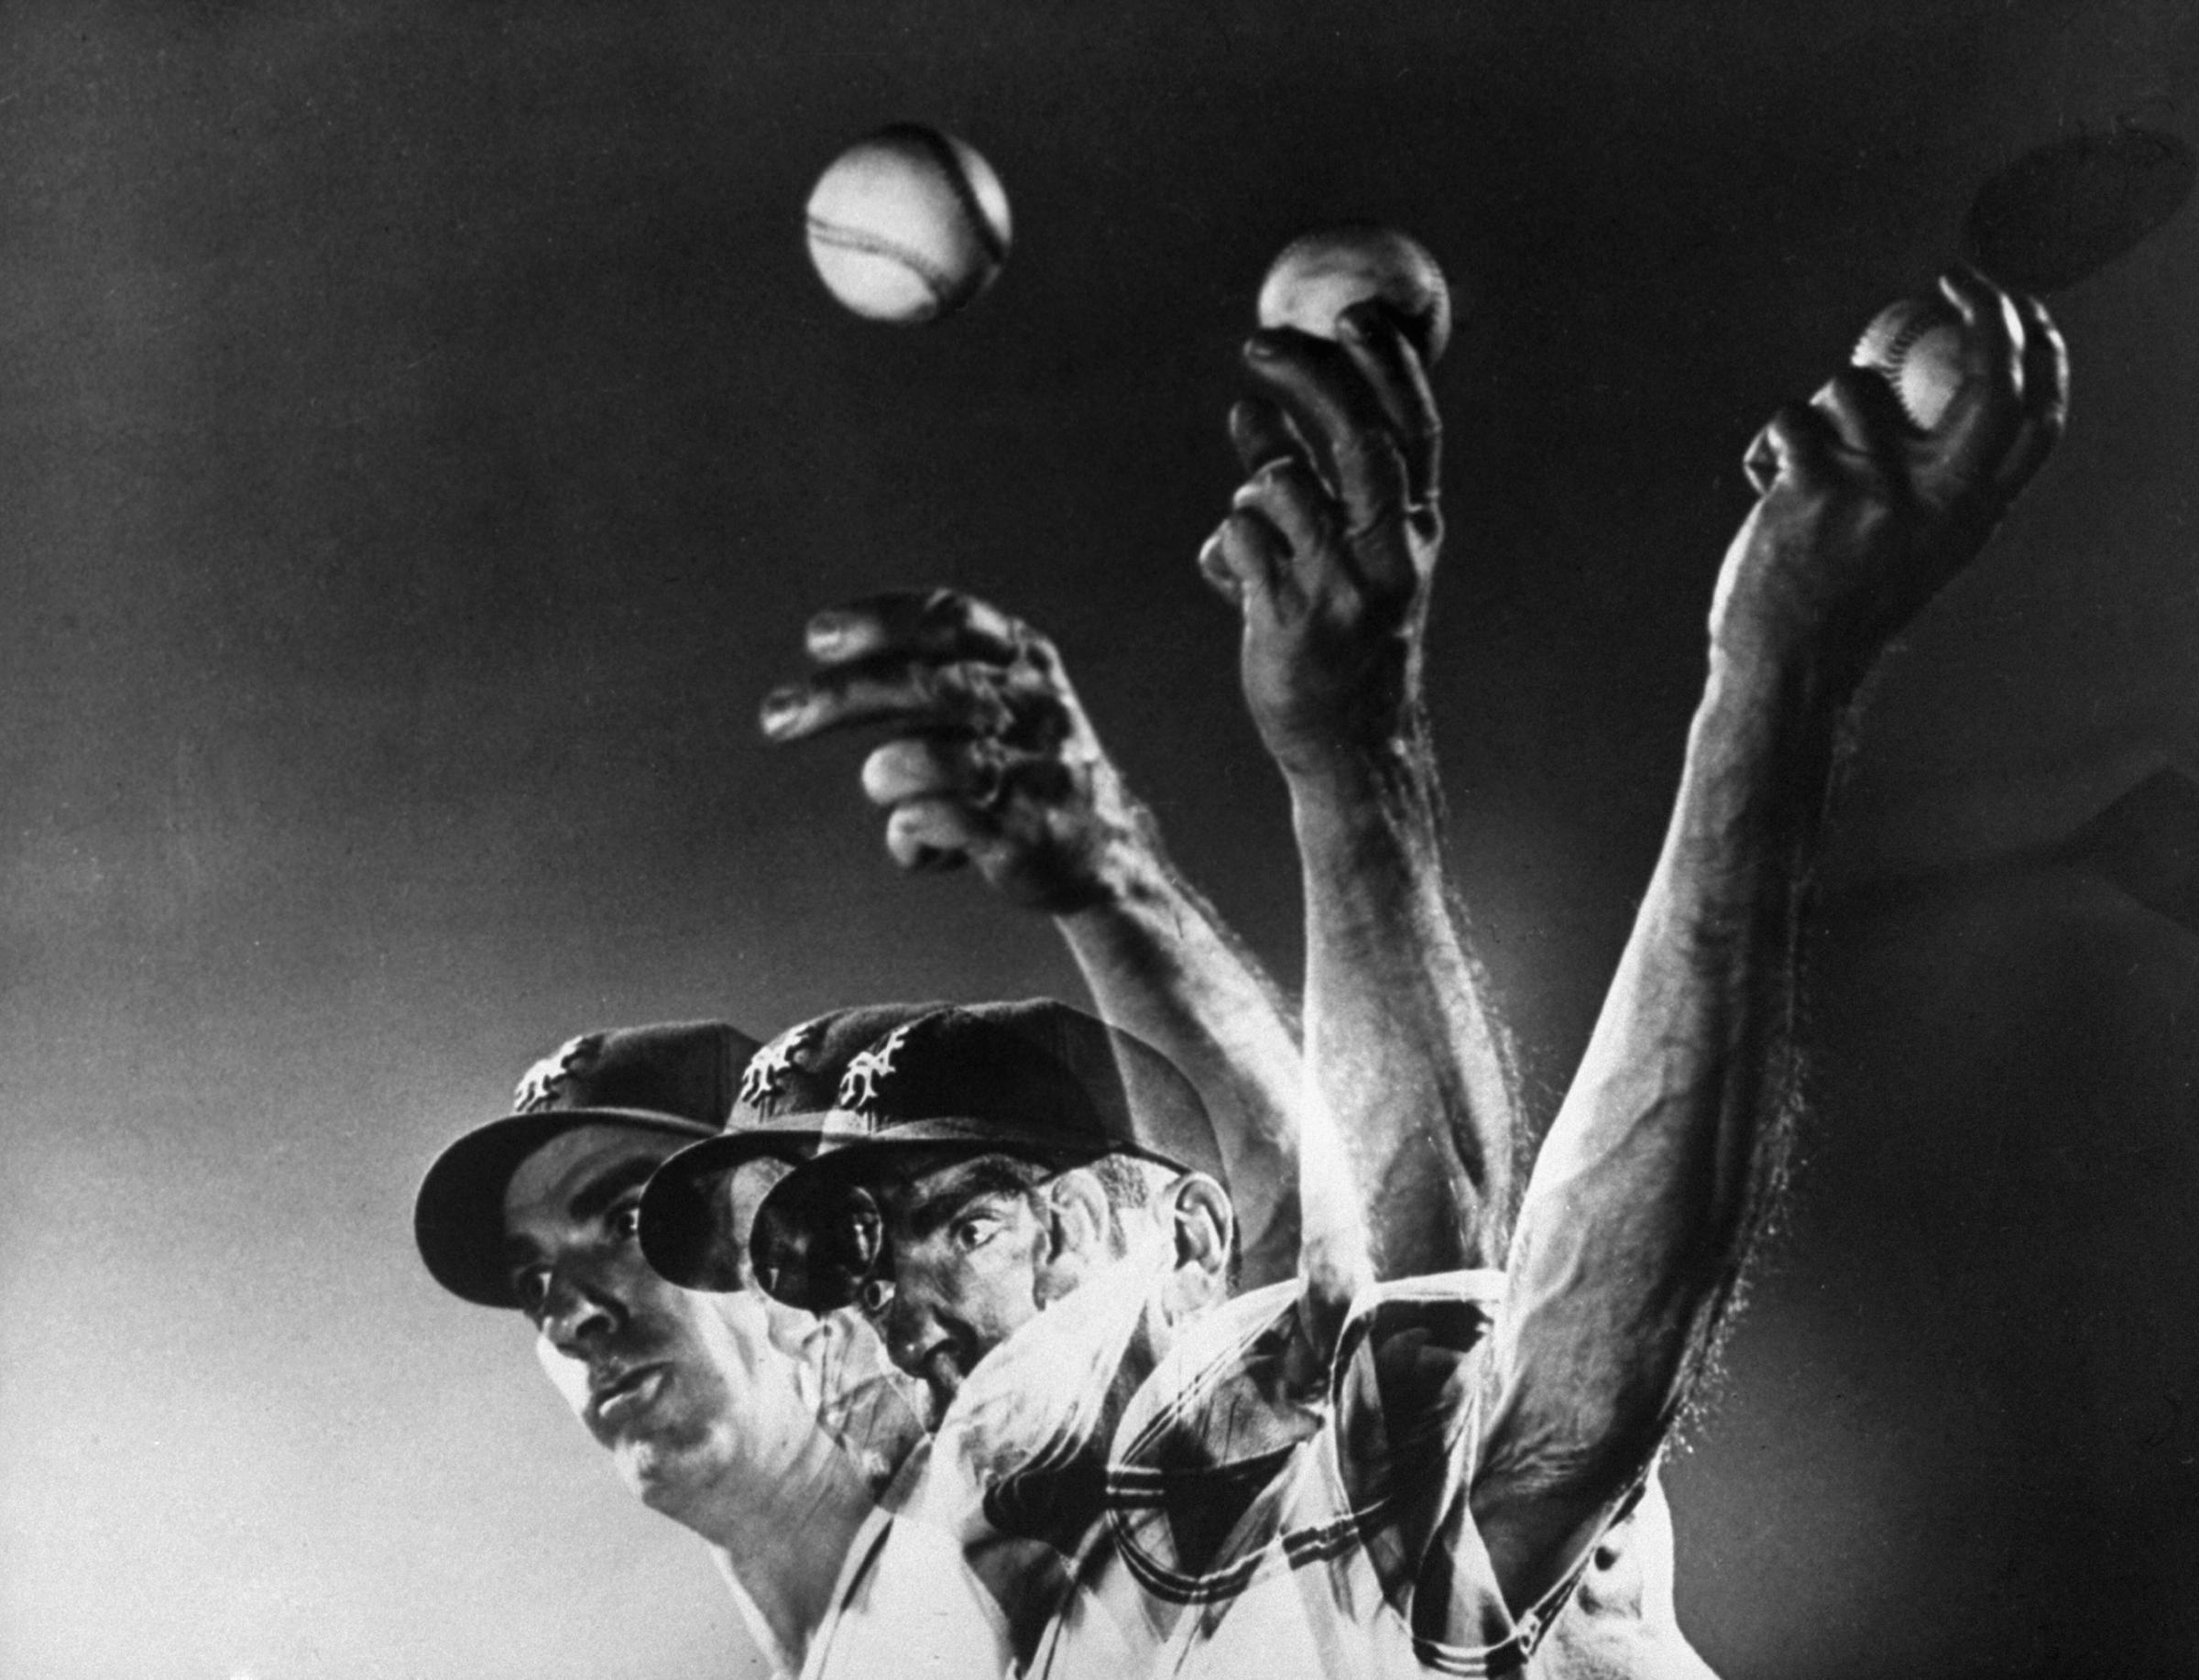 New York Giants pitcher Carl Hubbell throws a curve ball, 1940.